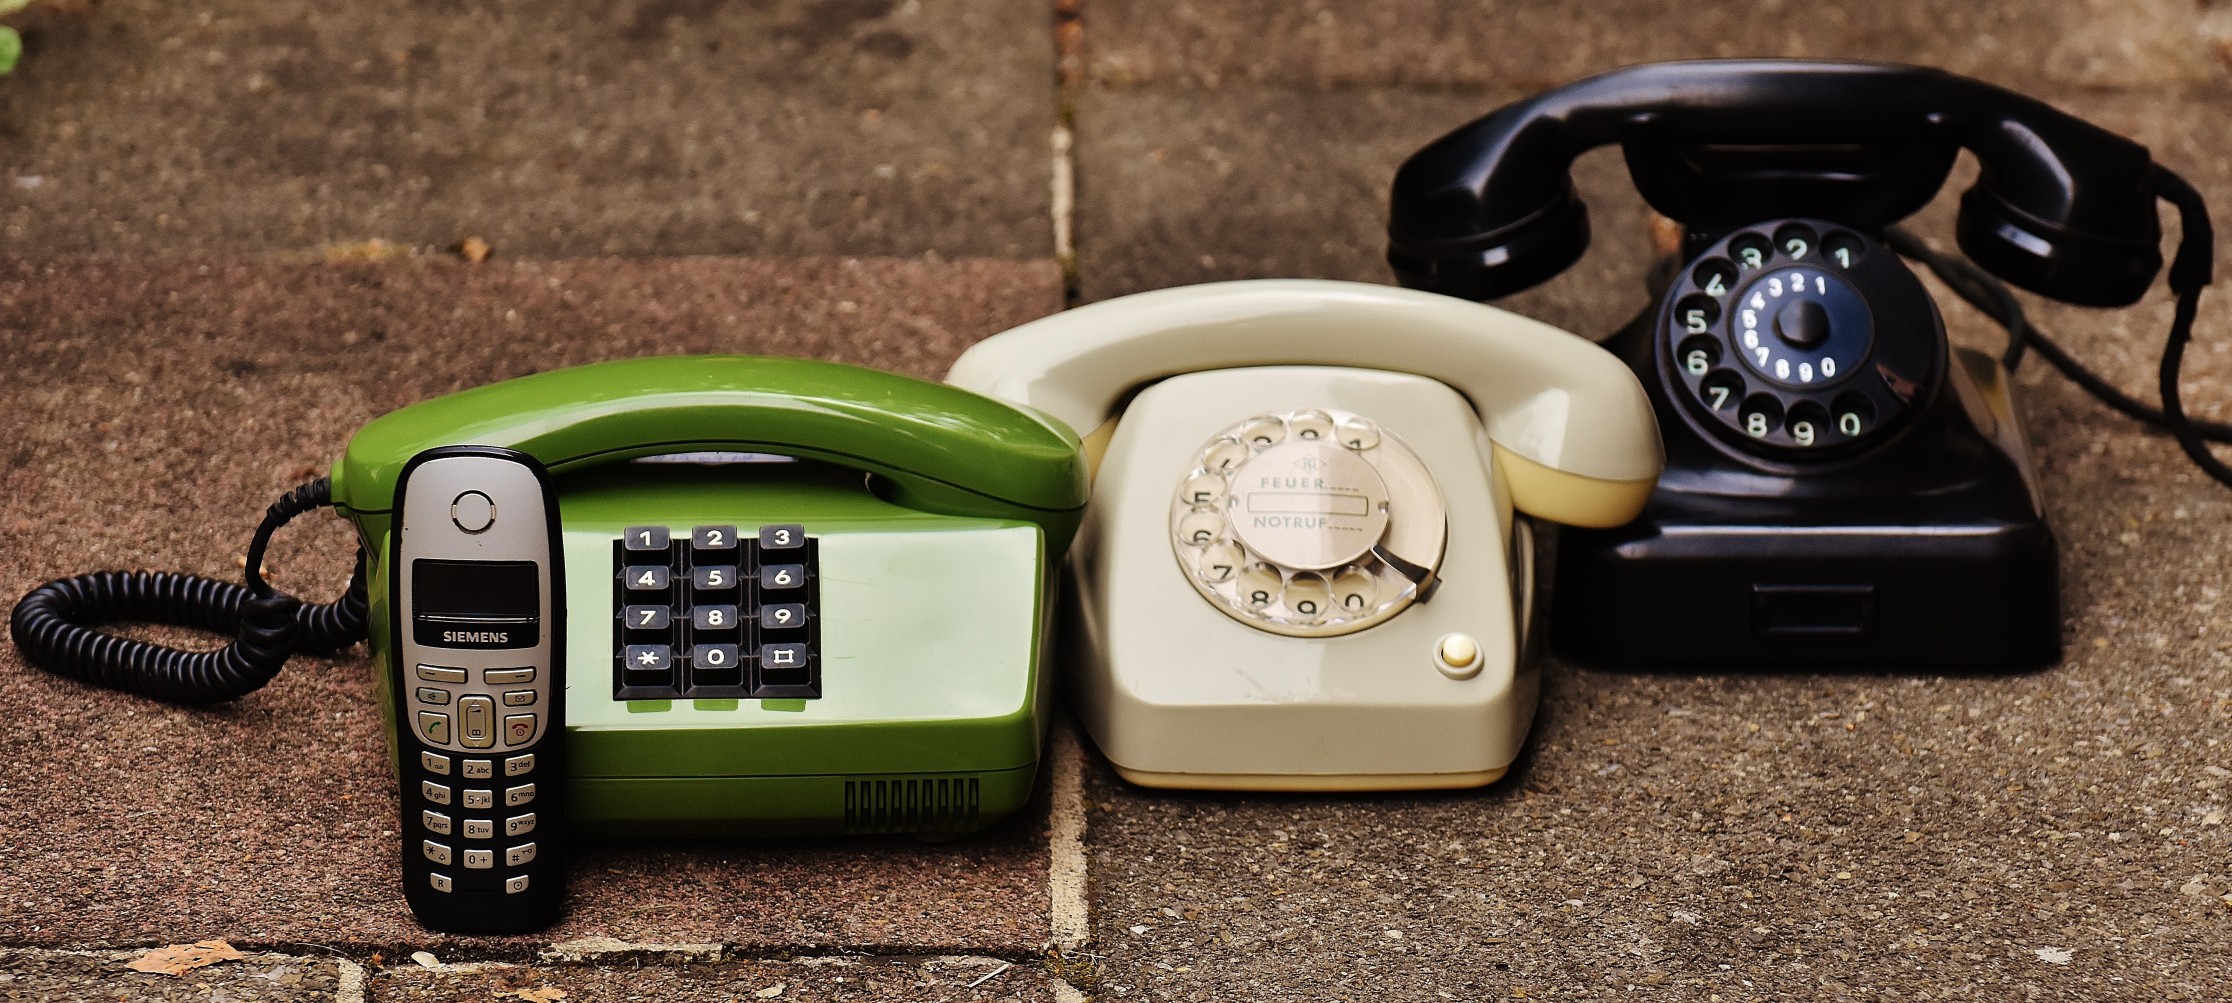 three telephones and a mobile phone image